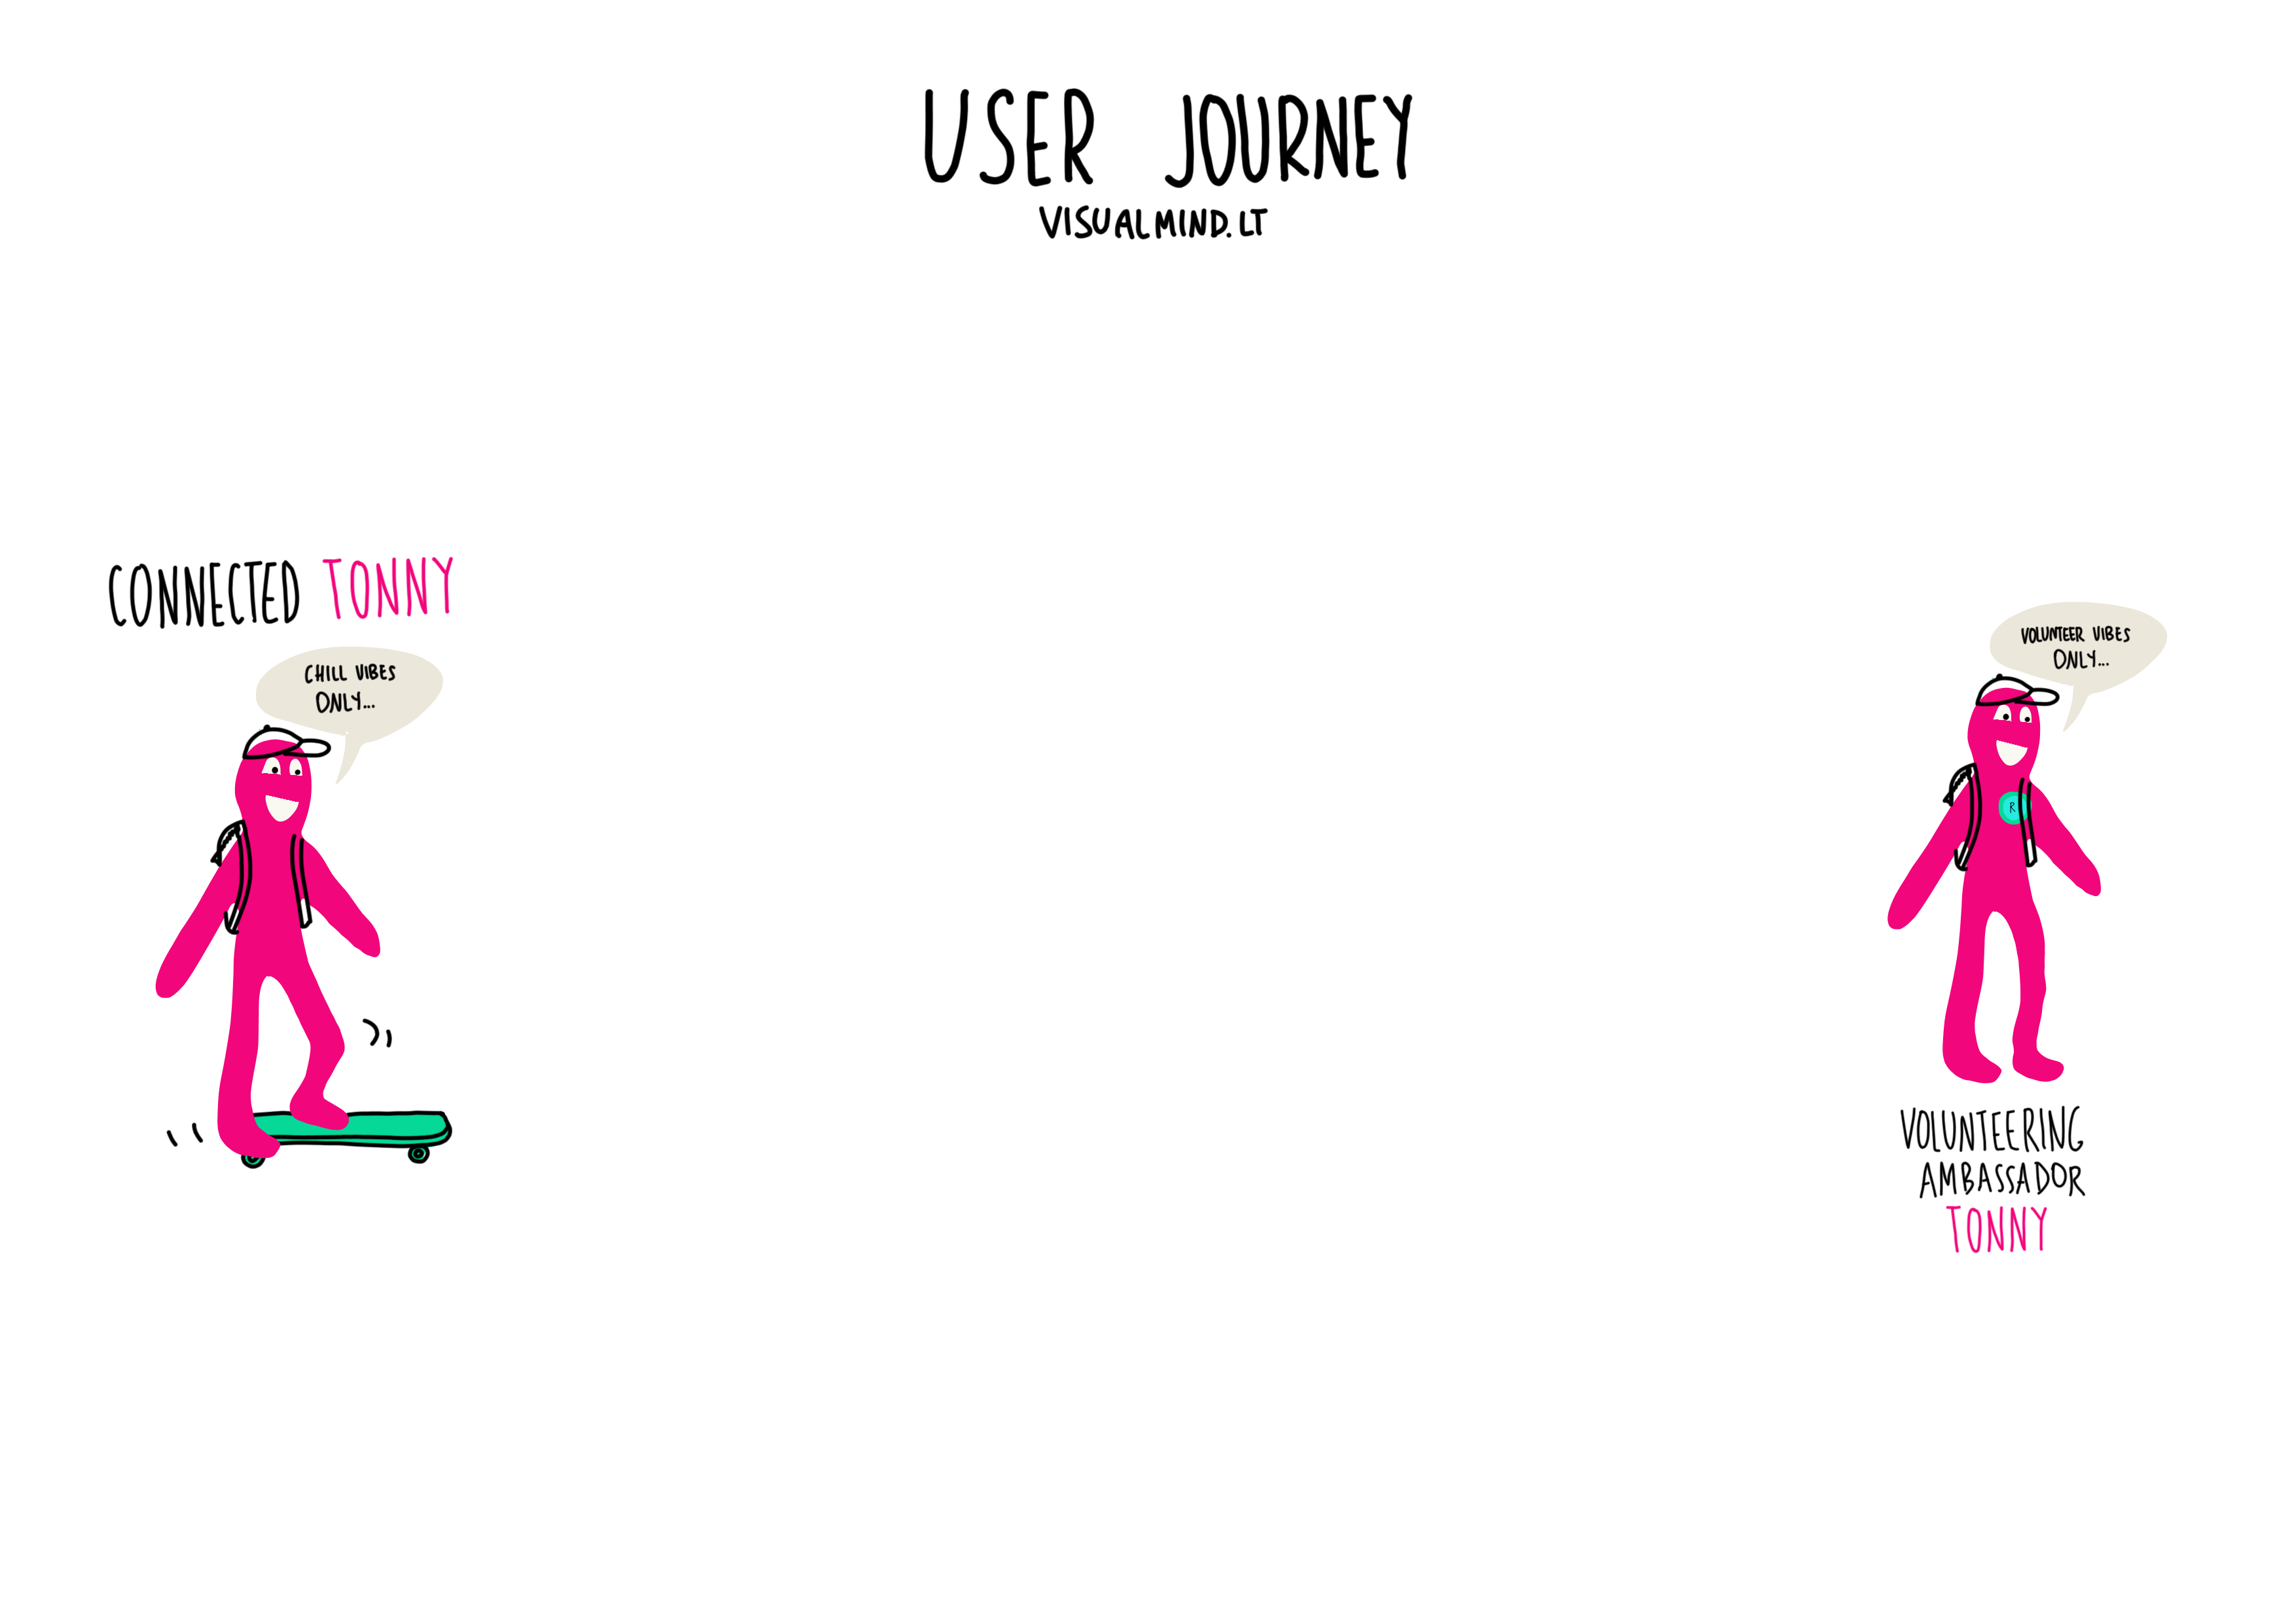 Image of user at the start and at the end of the journey